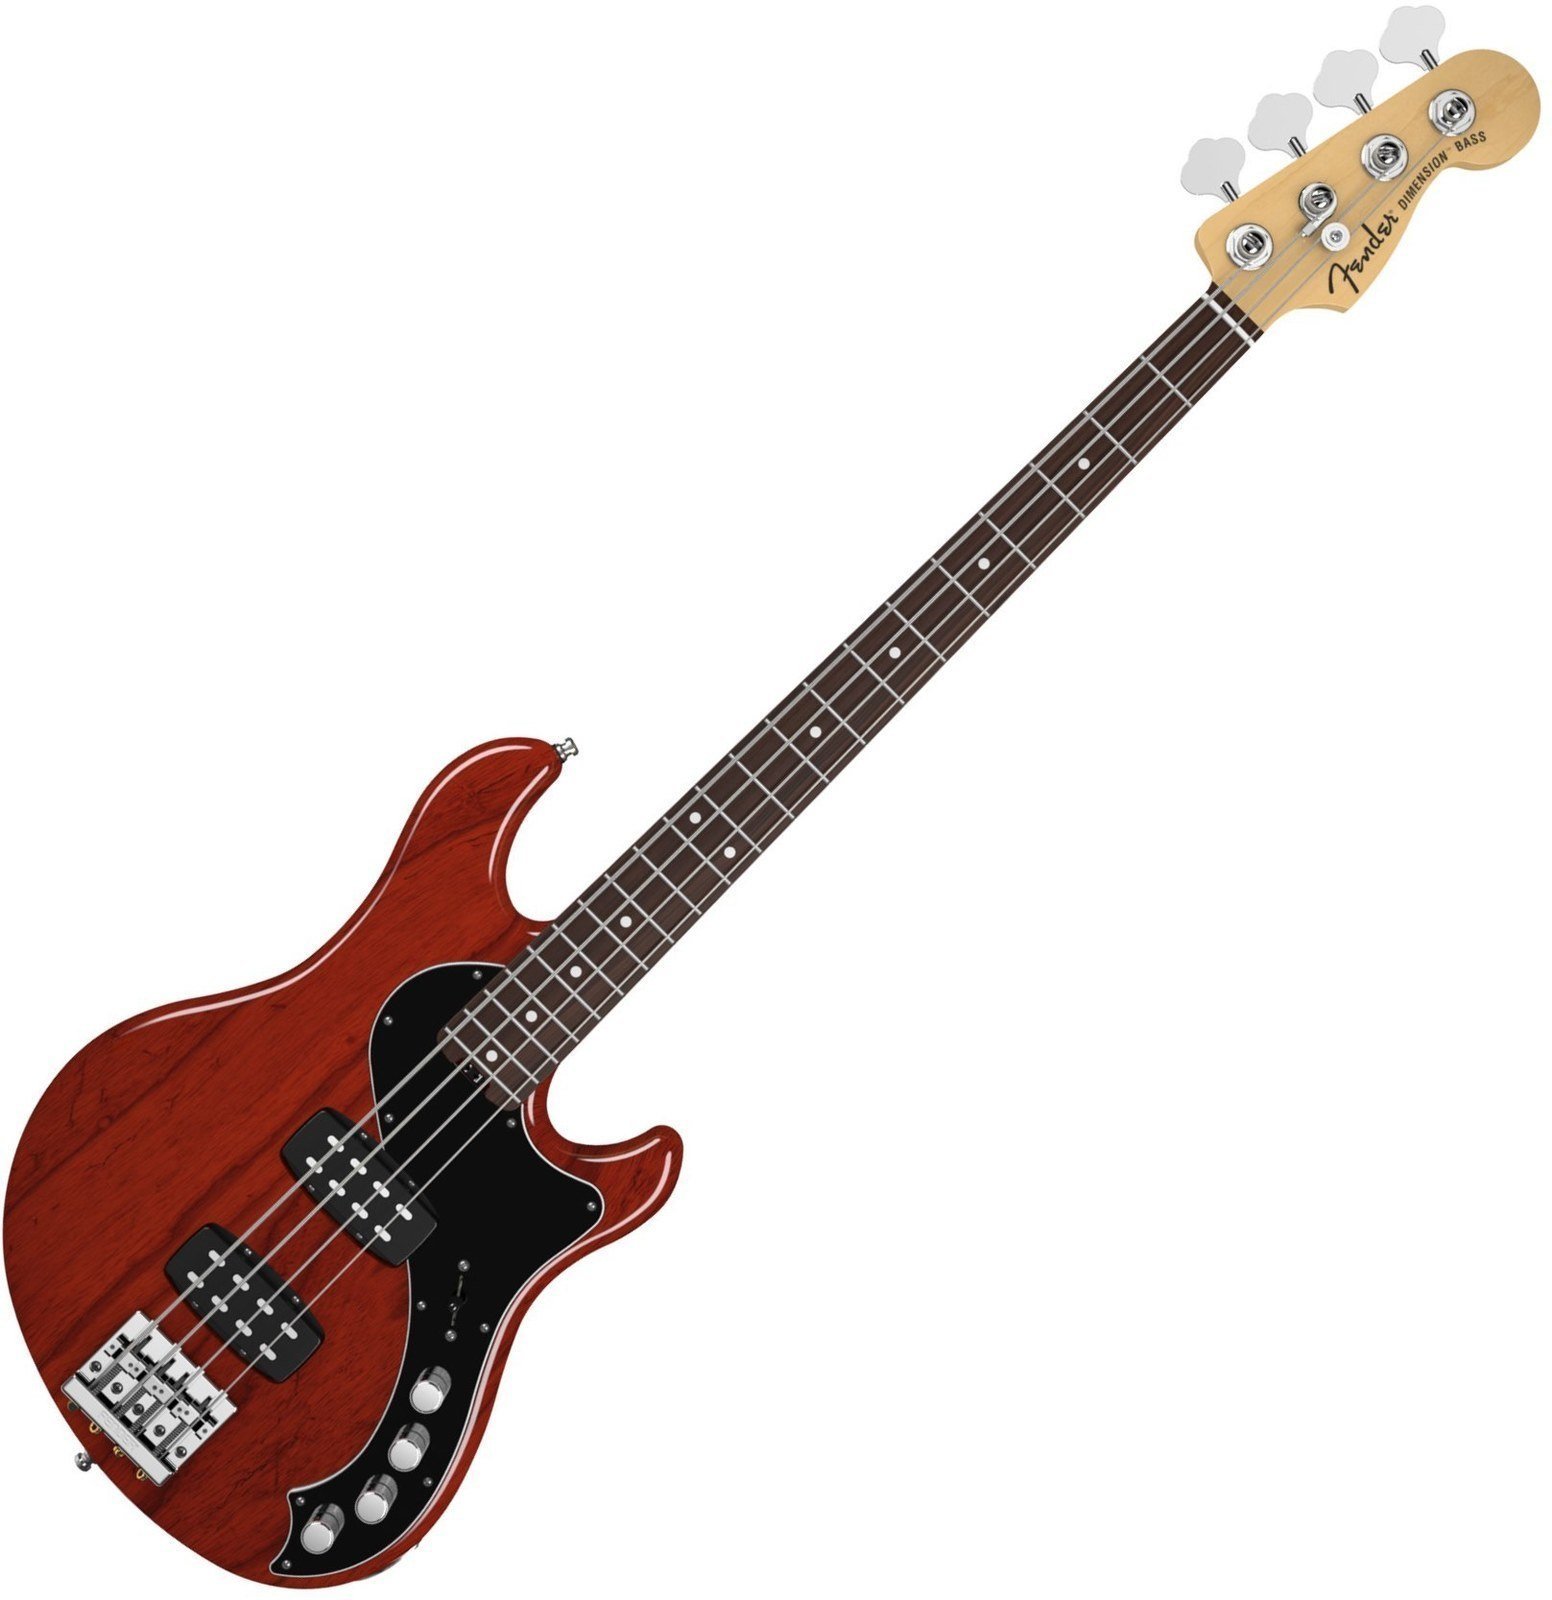 Basso Elettrico Fender American Deluxe Dimension Bass IV HH, Rosewood, Cayenne Burs